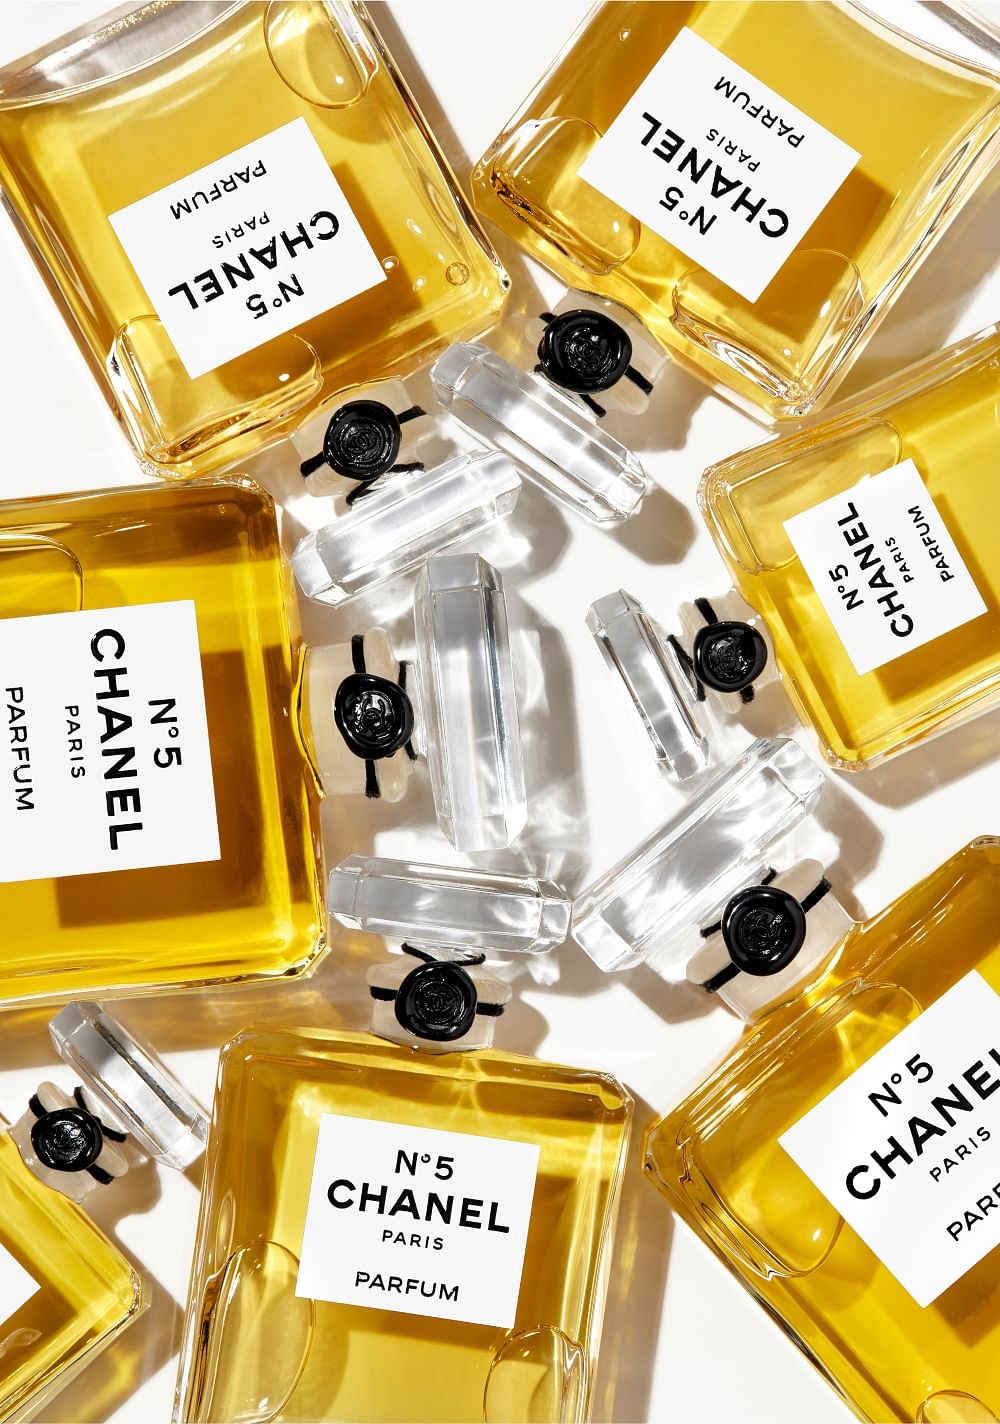 Saks Fêtes the 100th Anniversary of Chanel No. 5 With A Colorful Display